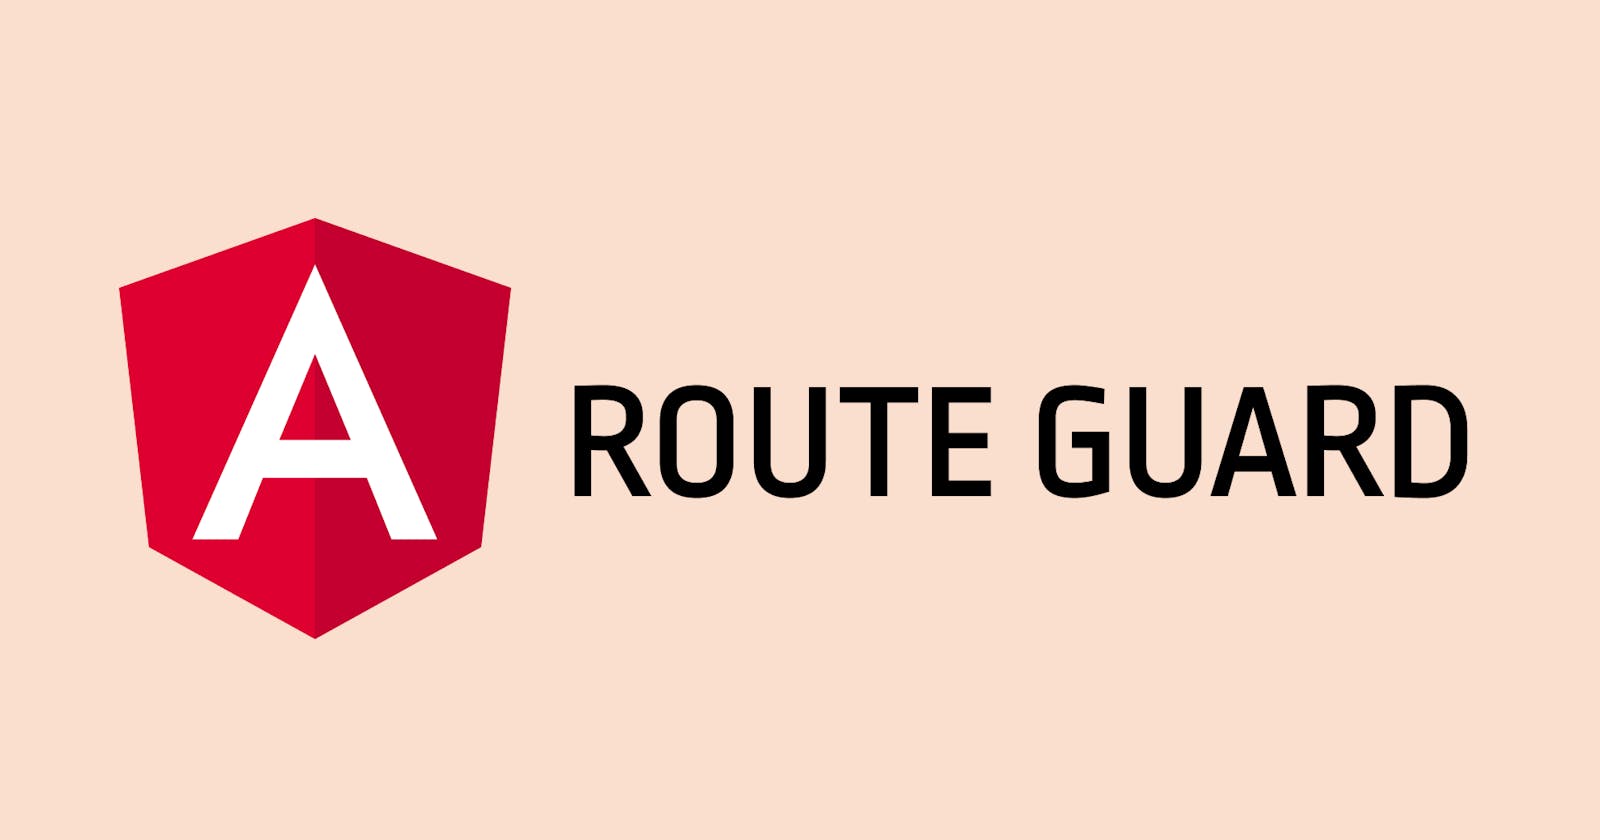 Make a route guard to implement Role-based access control
(RBAC) in Angular